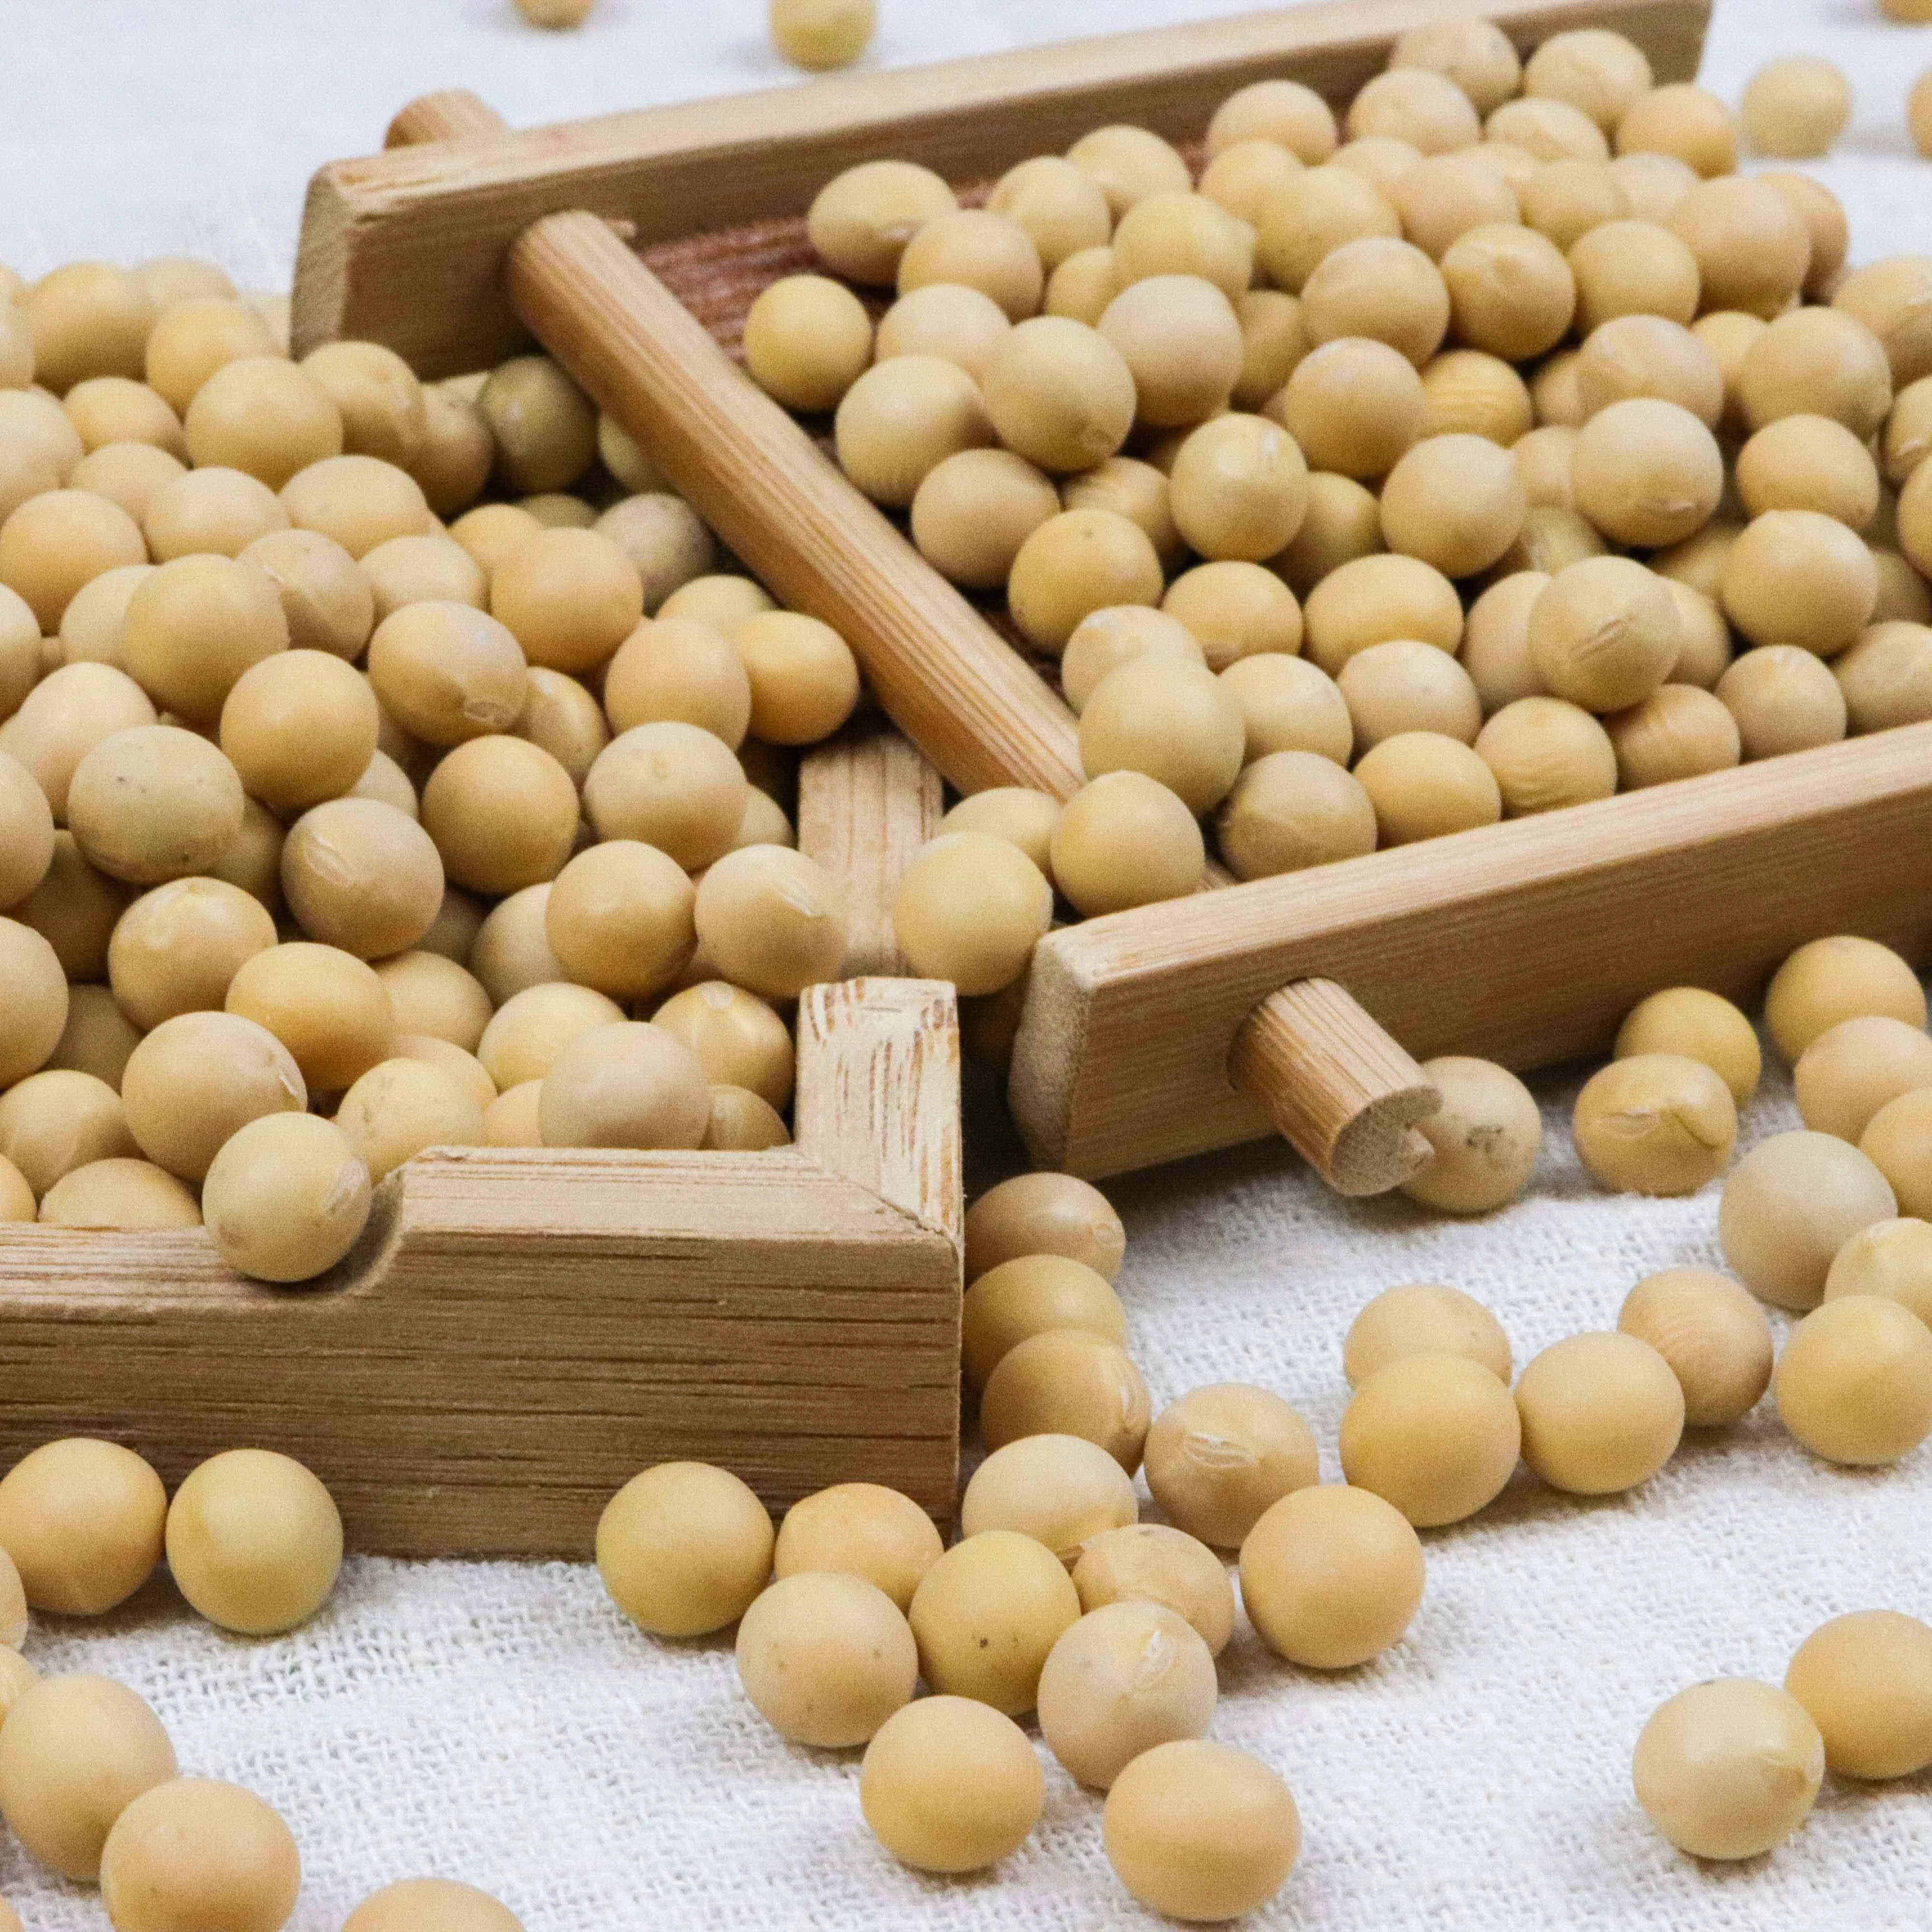 Eastern asia produced organic soybean used for extracting soybean oil